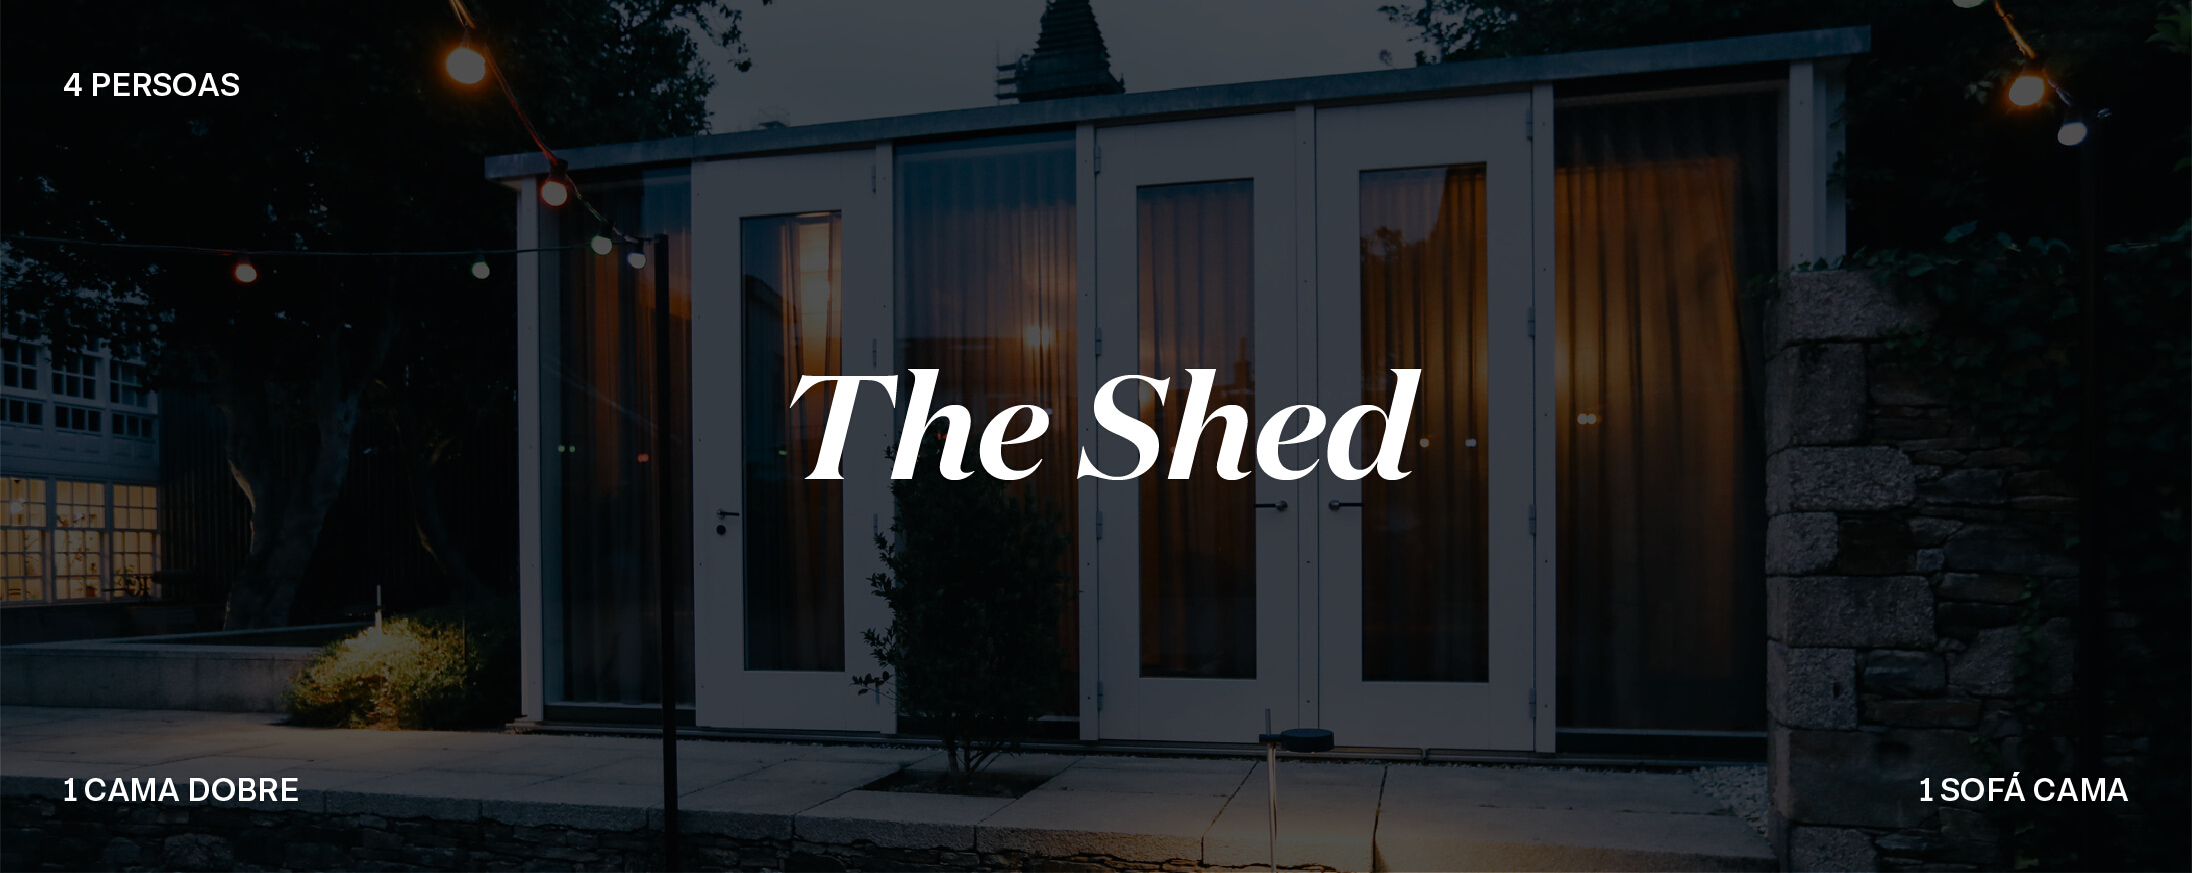 THE SHED